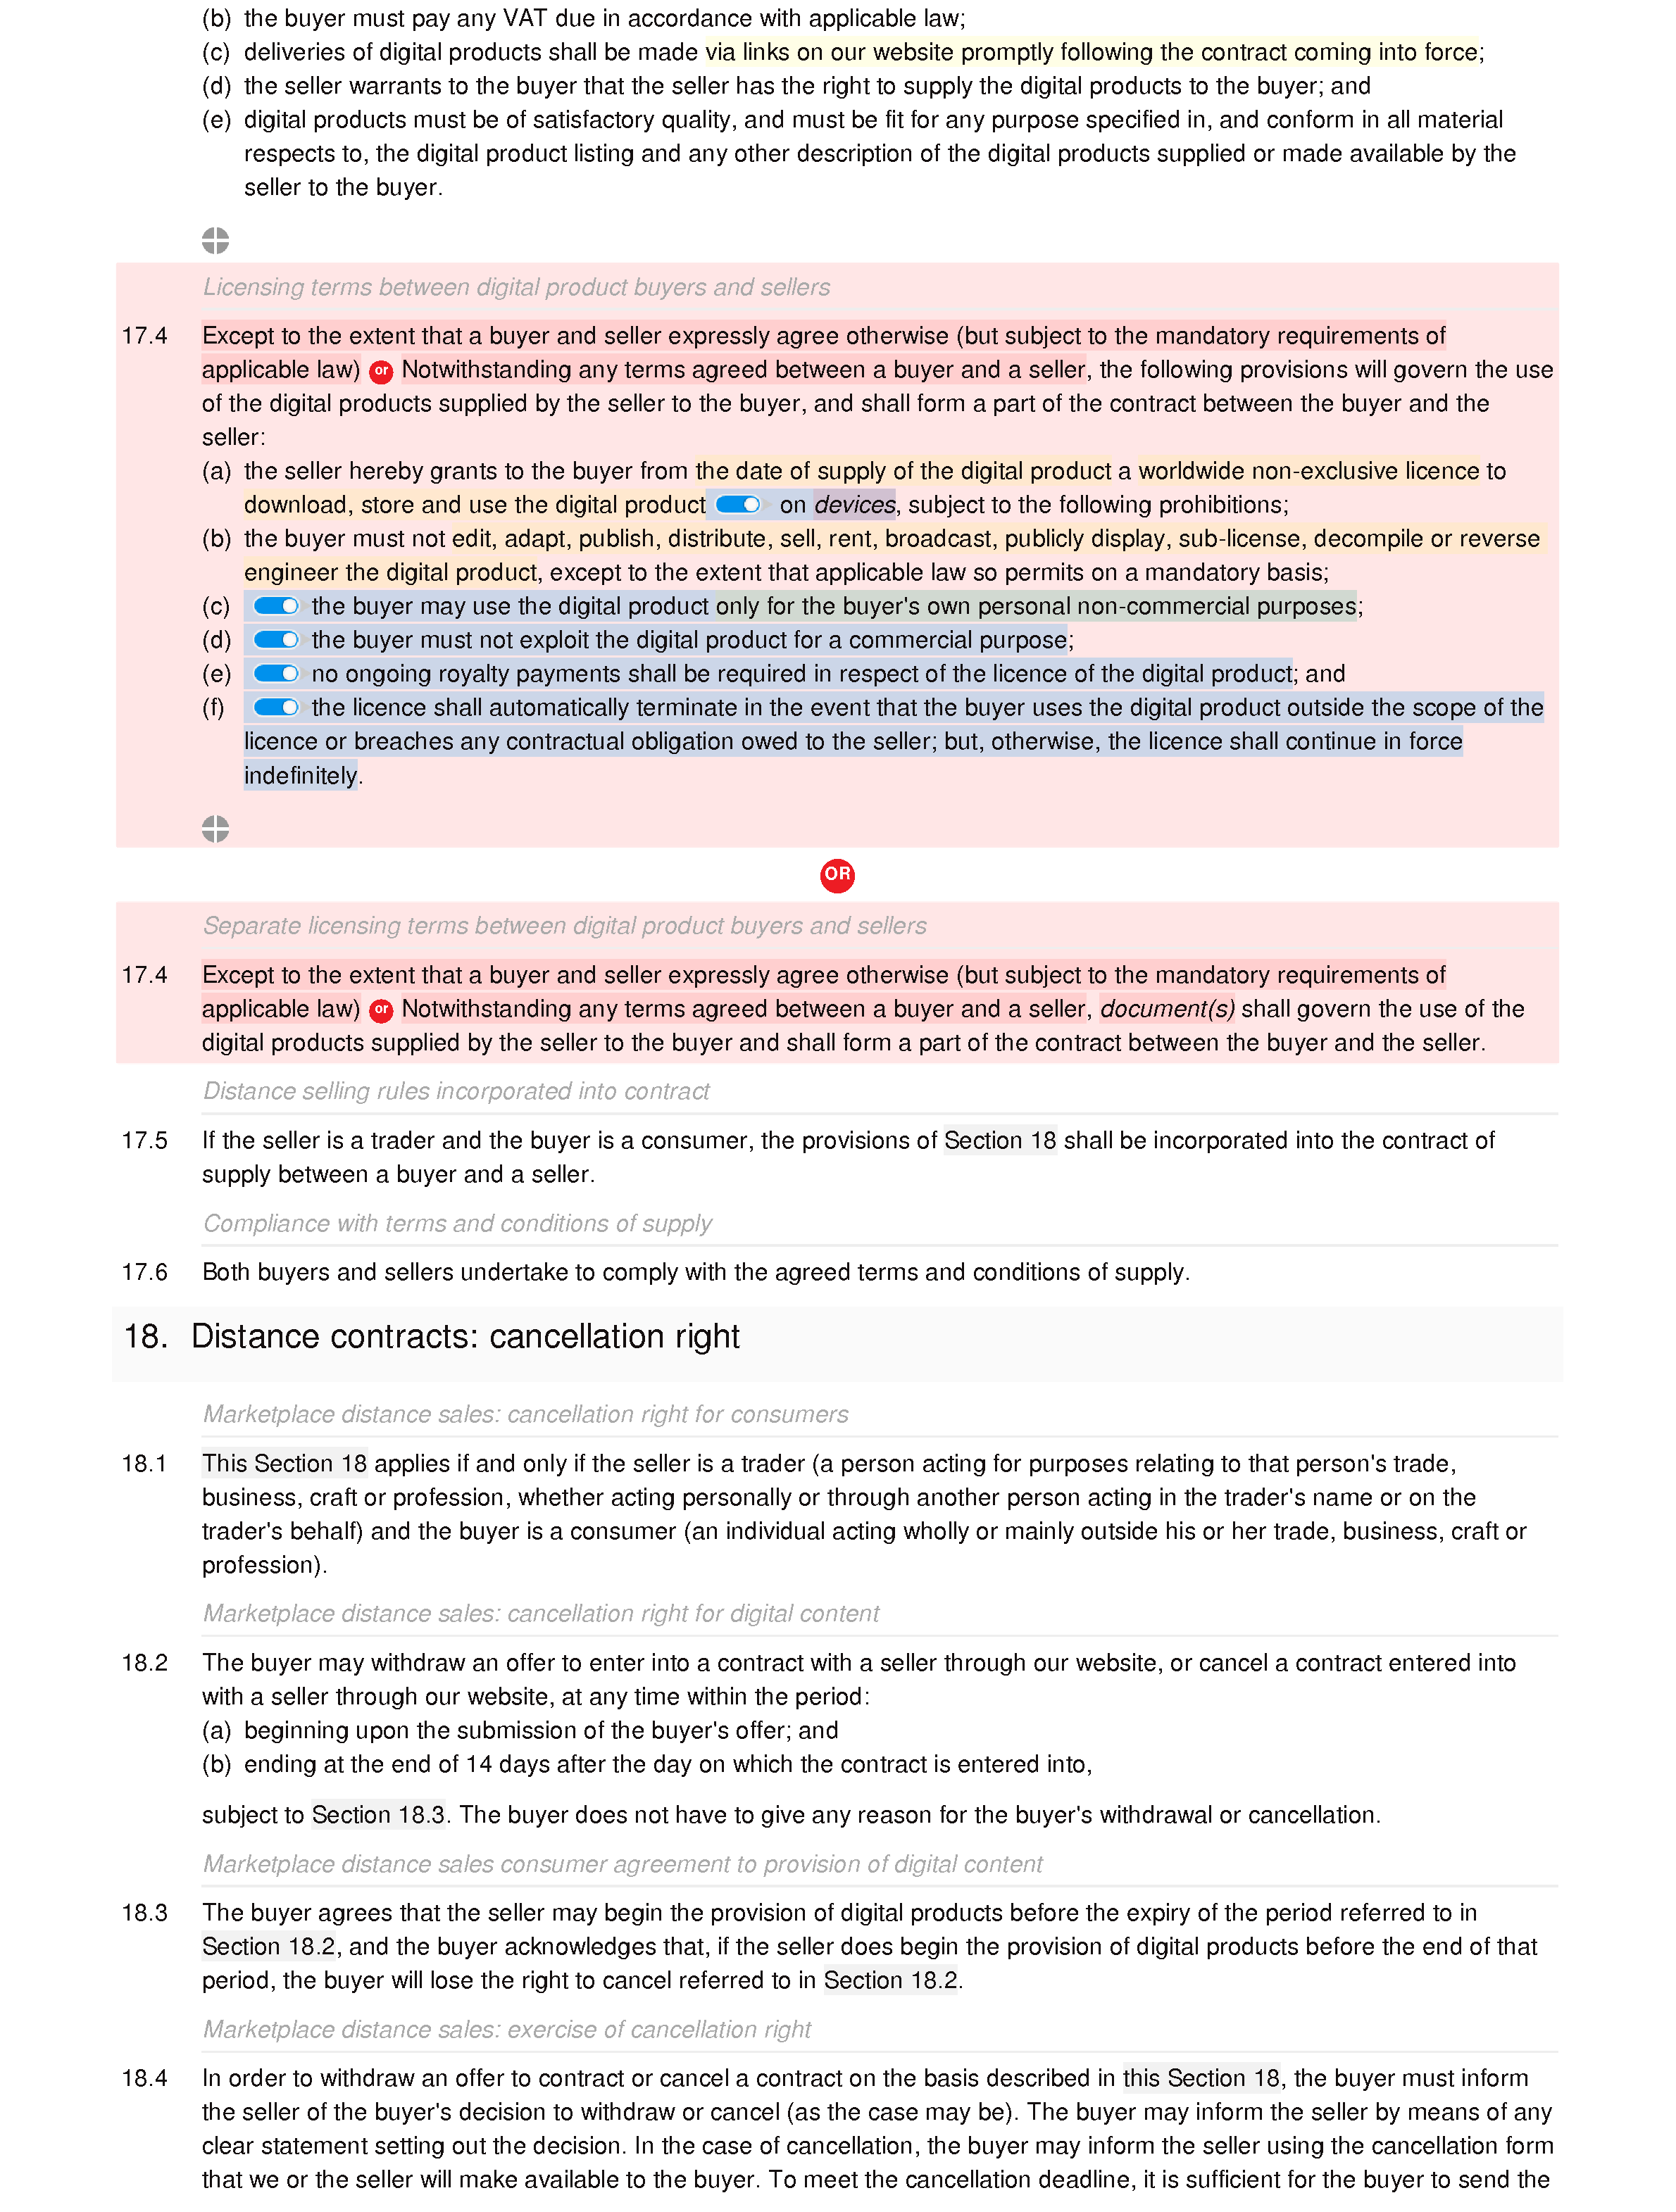 Digital marketplace website terms and conditions document editor preview